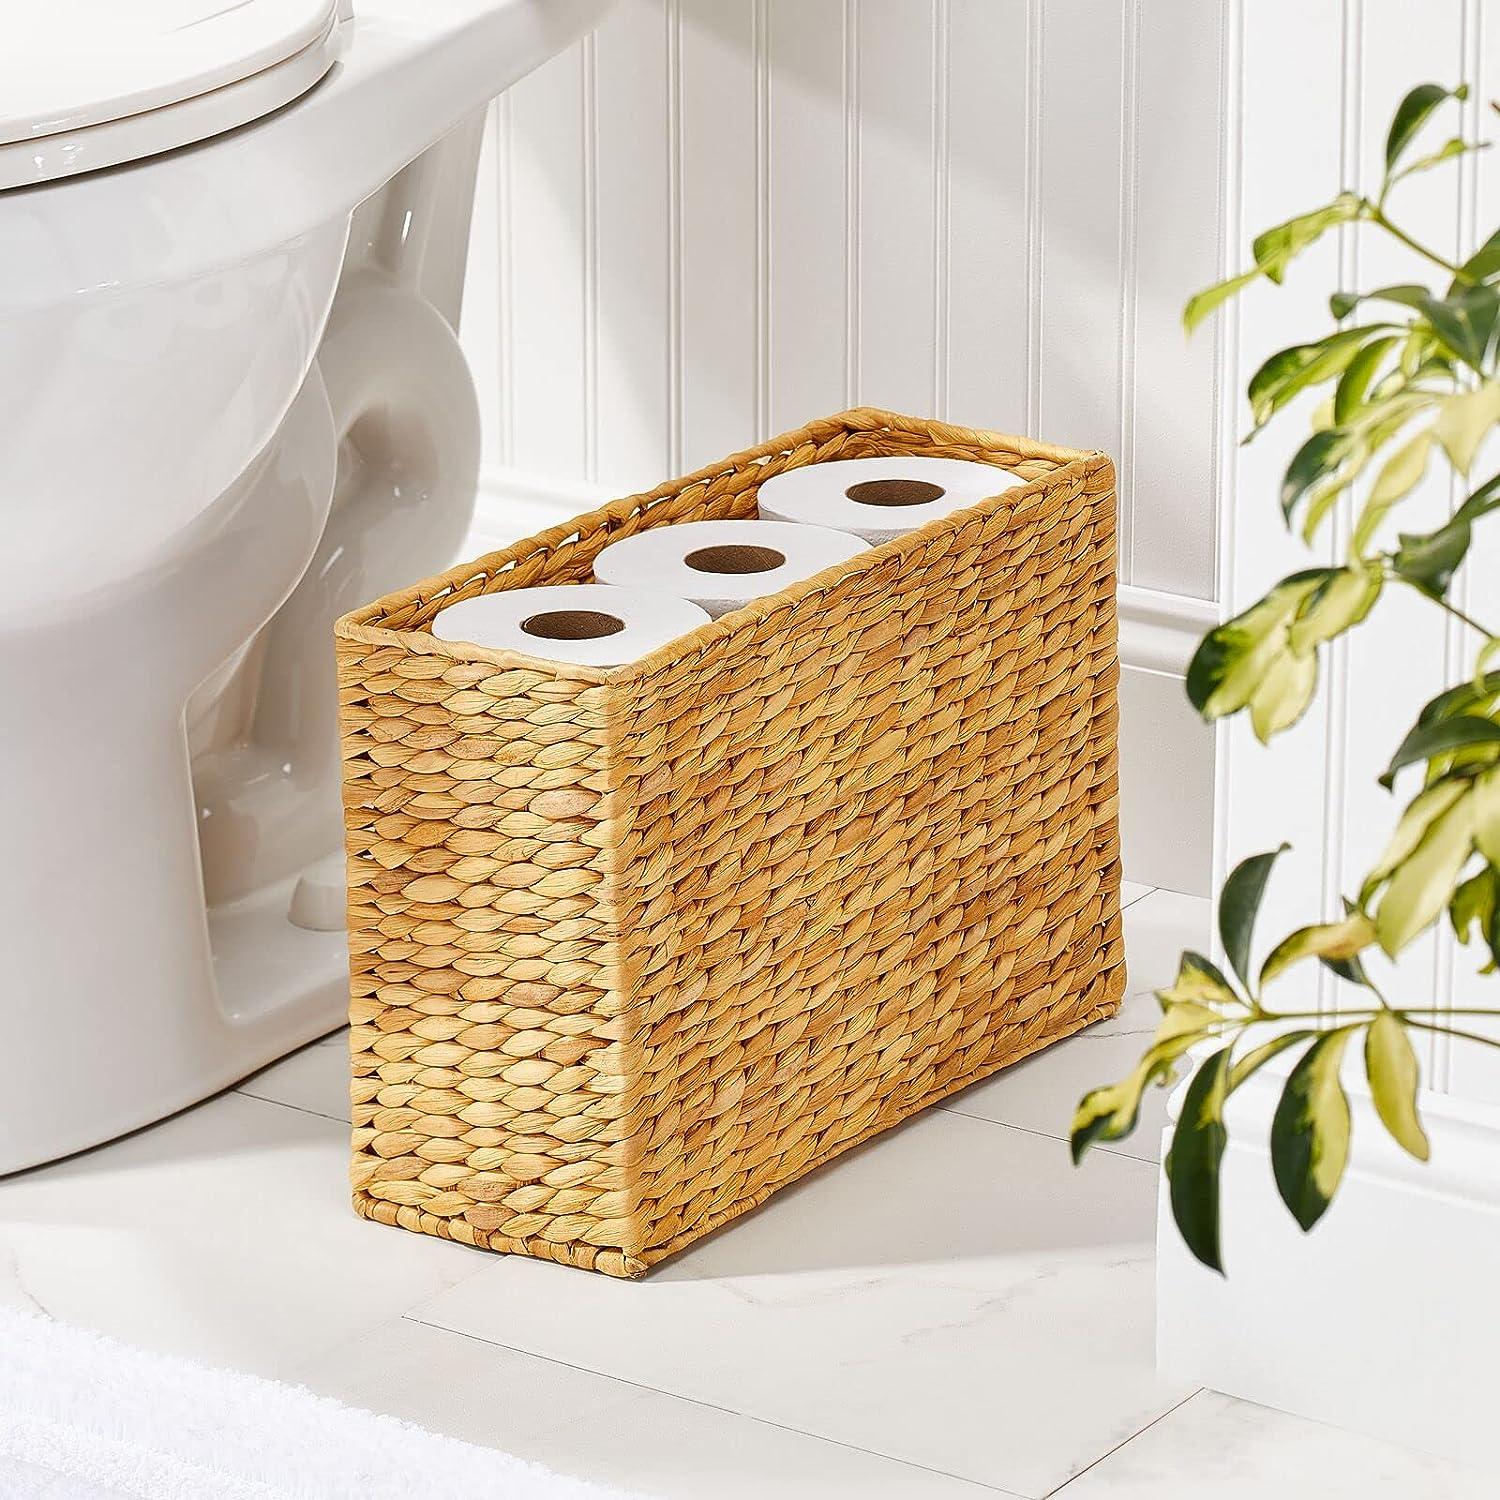 mDesign Rustic Farmhouse Rice Weave Hyacinth Toilet Paper Holder Basket -  Small Storage Organizer Tank Topper for Bathroom Counter or Top of Toilet -  Holds 6 Rolls of Toilet Paper - Natural/Tan